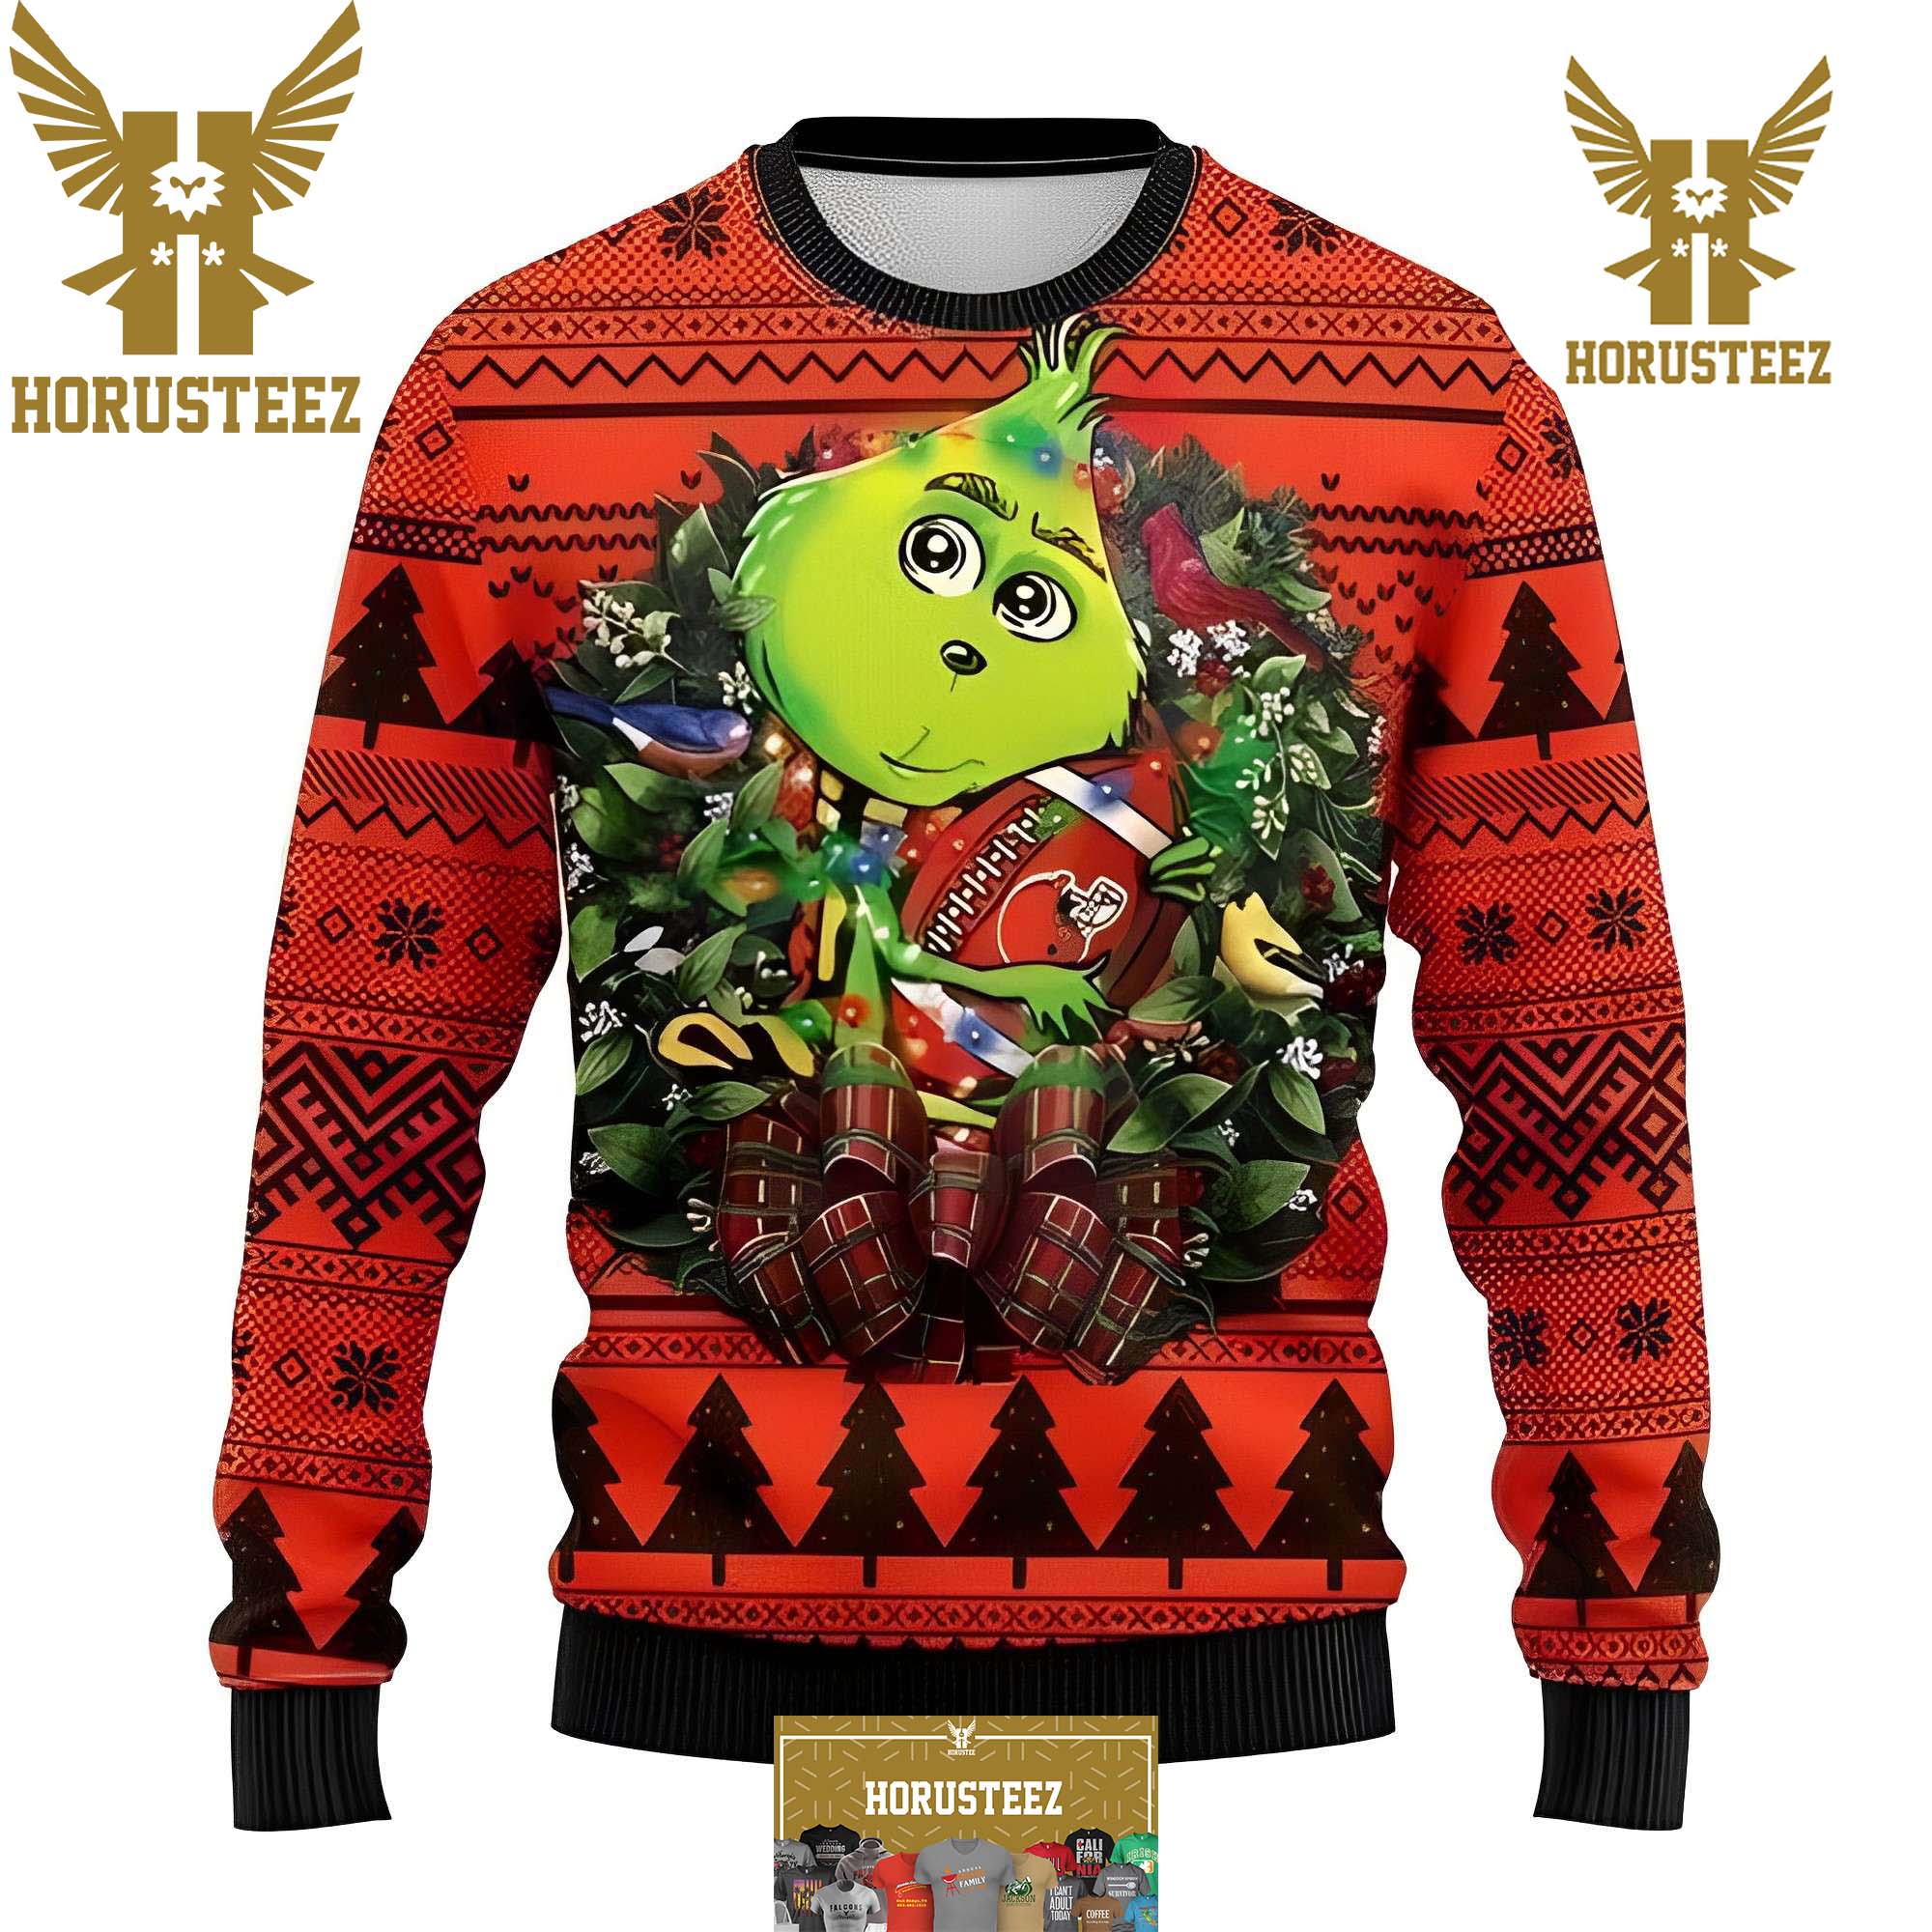 The Cleveland Browns NFL Cute Grinch Best For Xmas Holiday Christmas Ugly Sweater